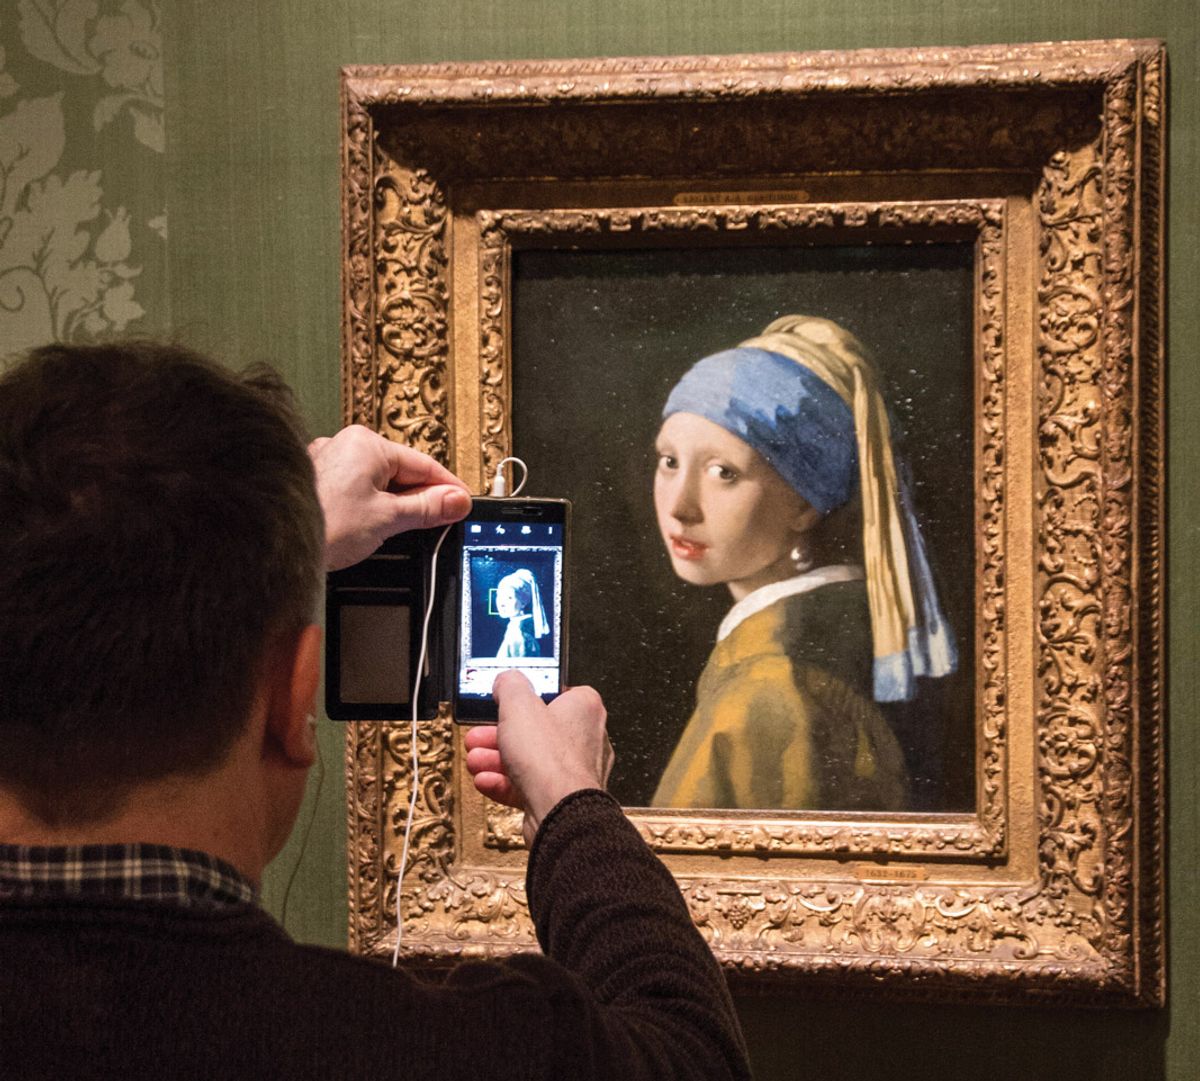 The Mauritshuis in The Hague, home to Vermeer’s Girl With a Pearl Earring (1665), has released thousands of free digital images Jan Fritz / Alamy